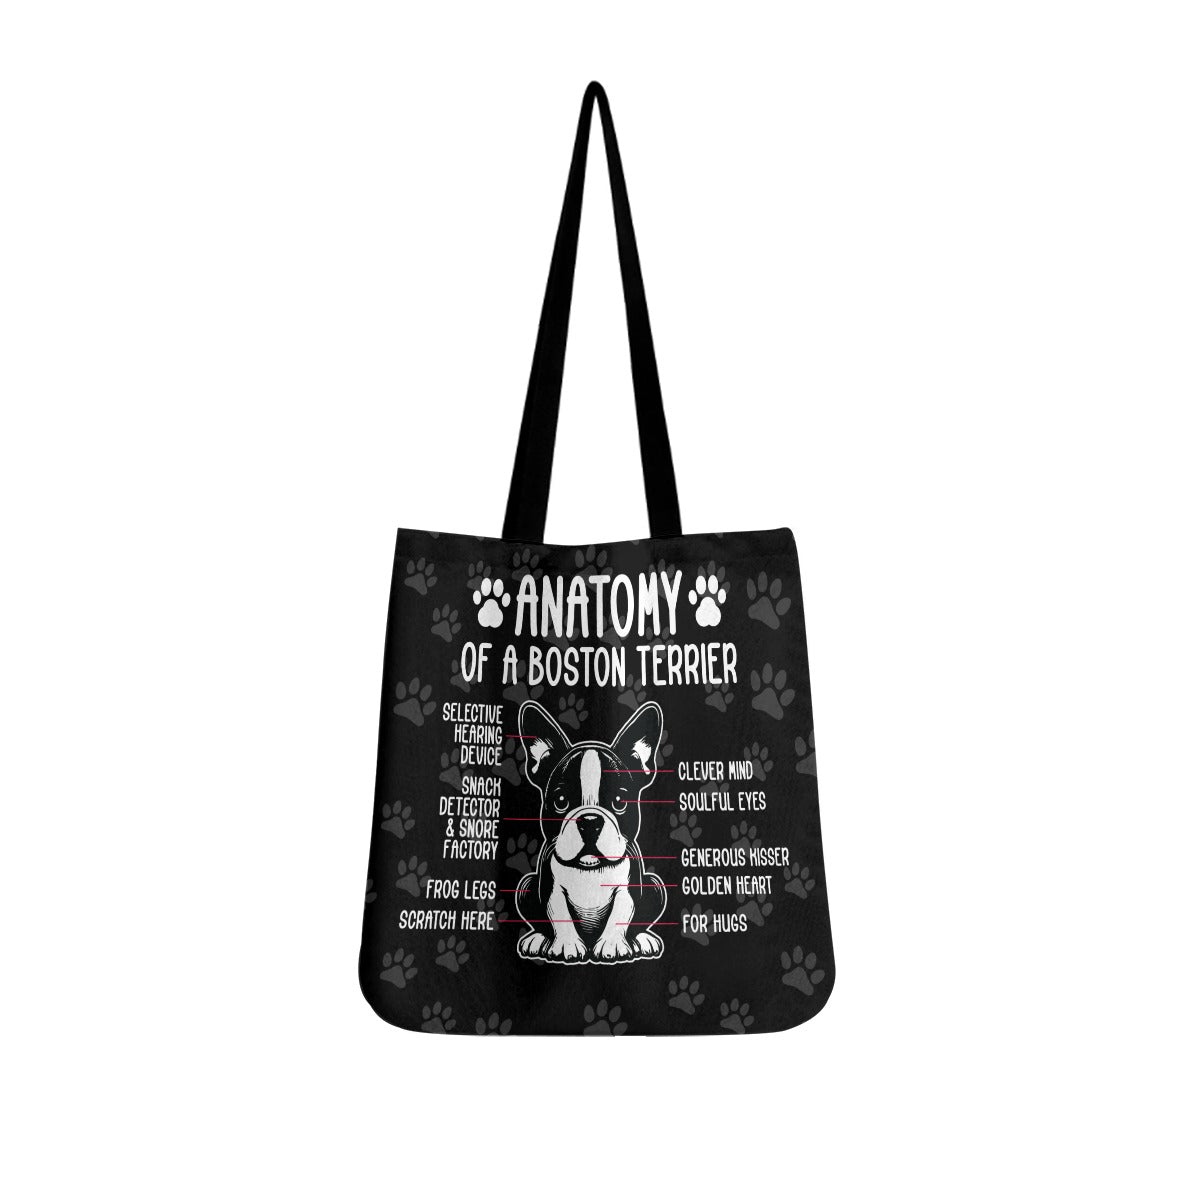 Bean - Cloth Tote Bags for Boston Terrier lovers